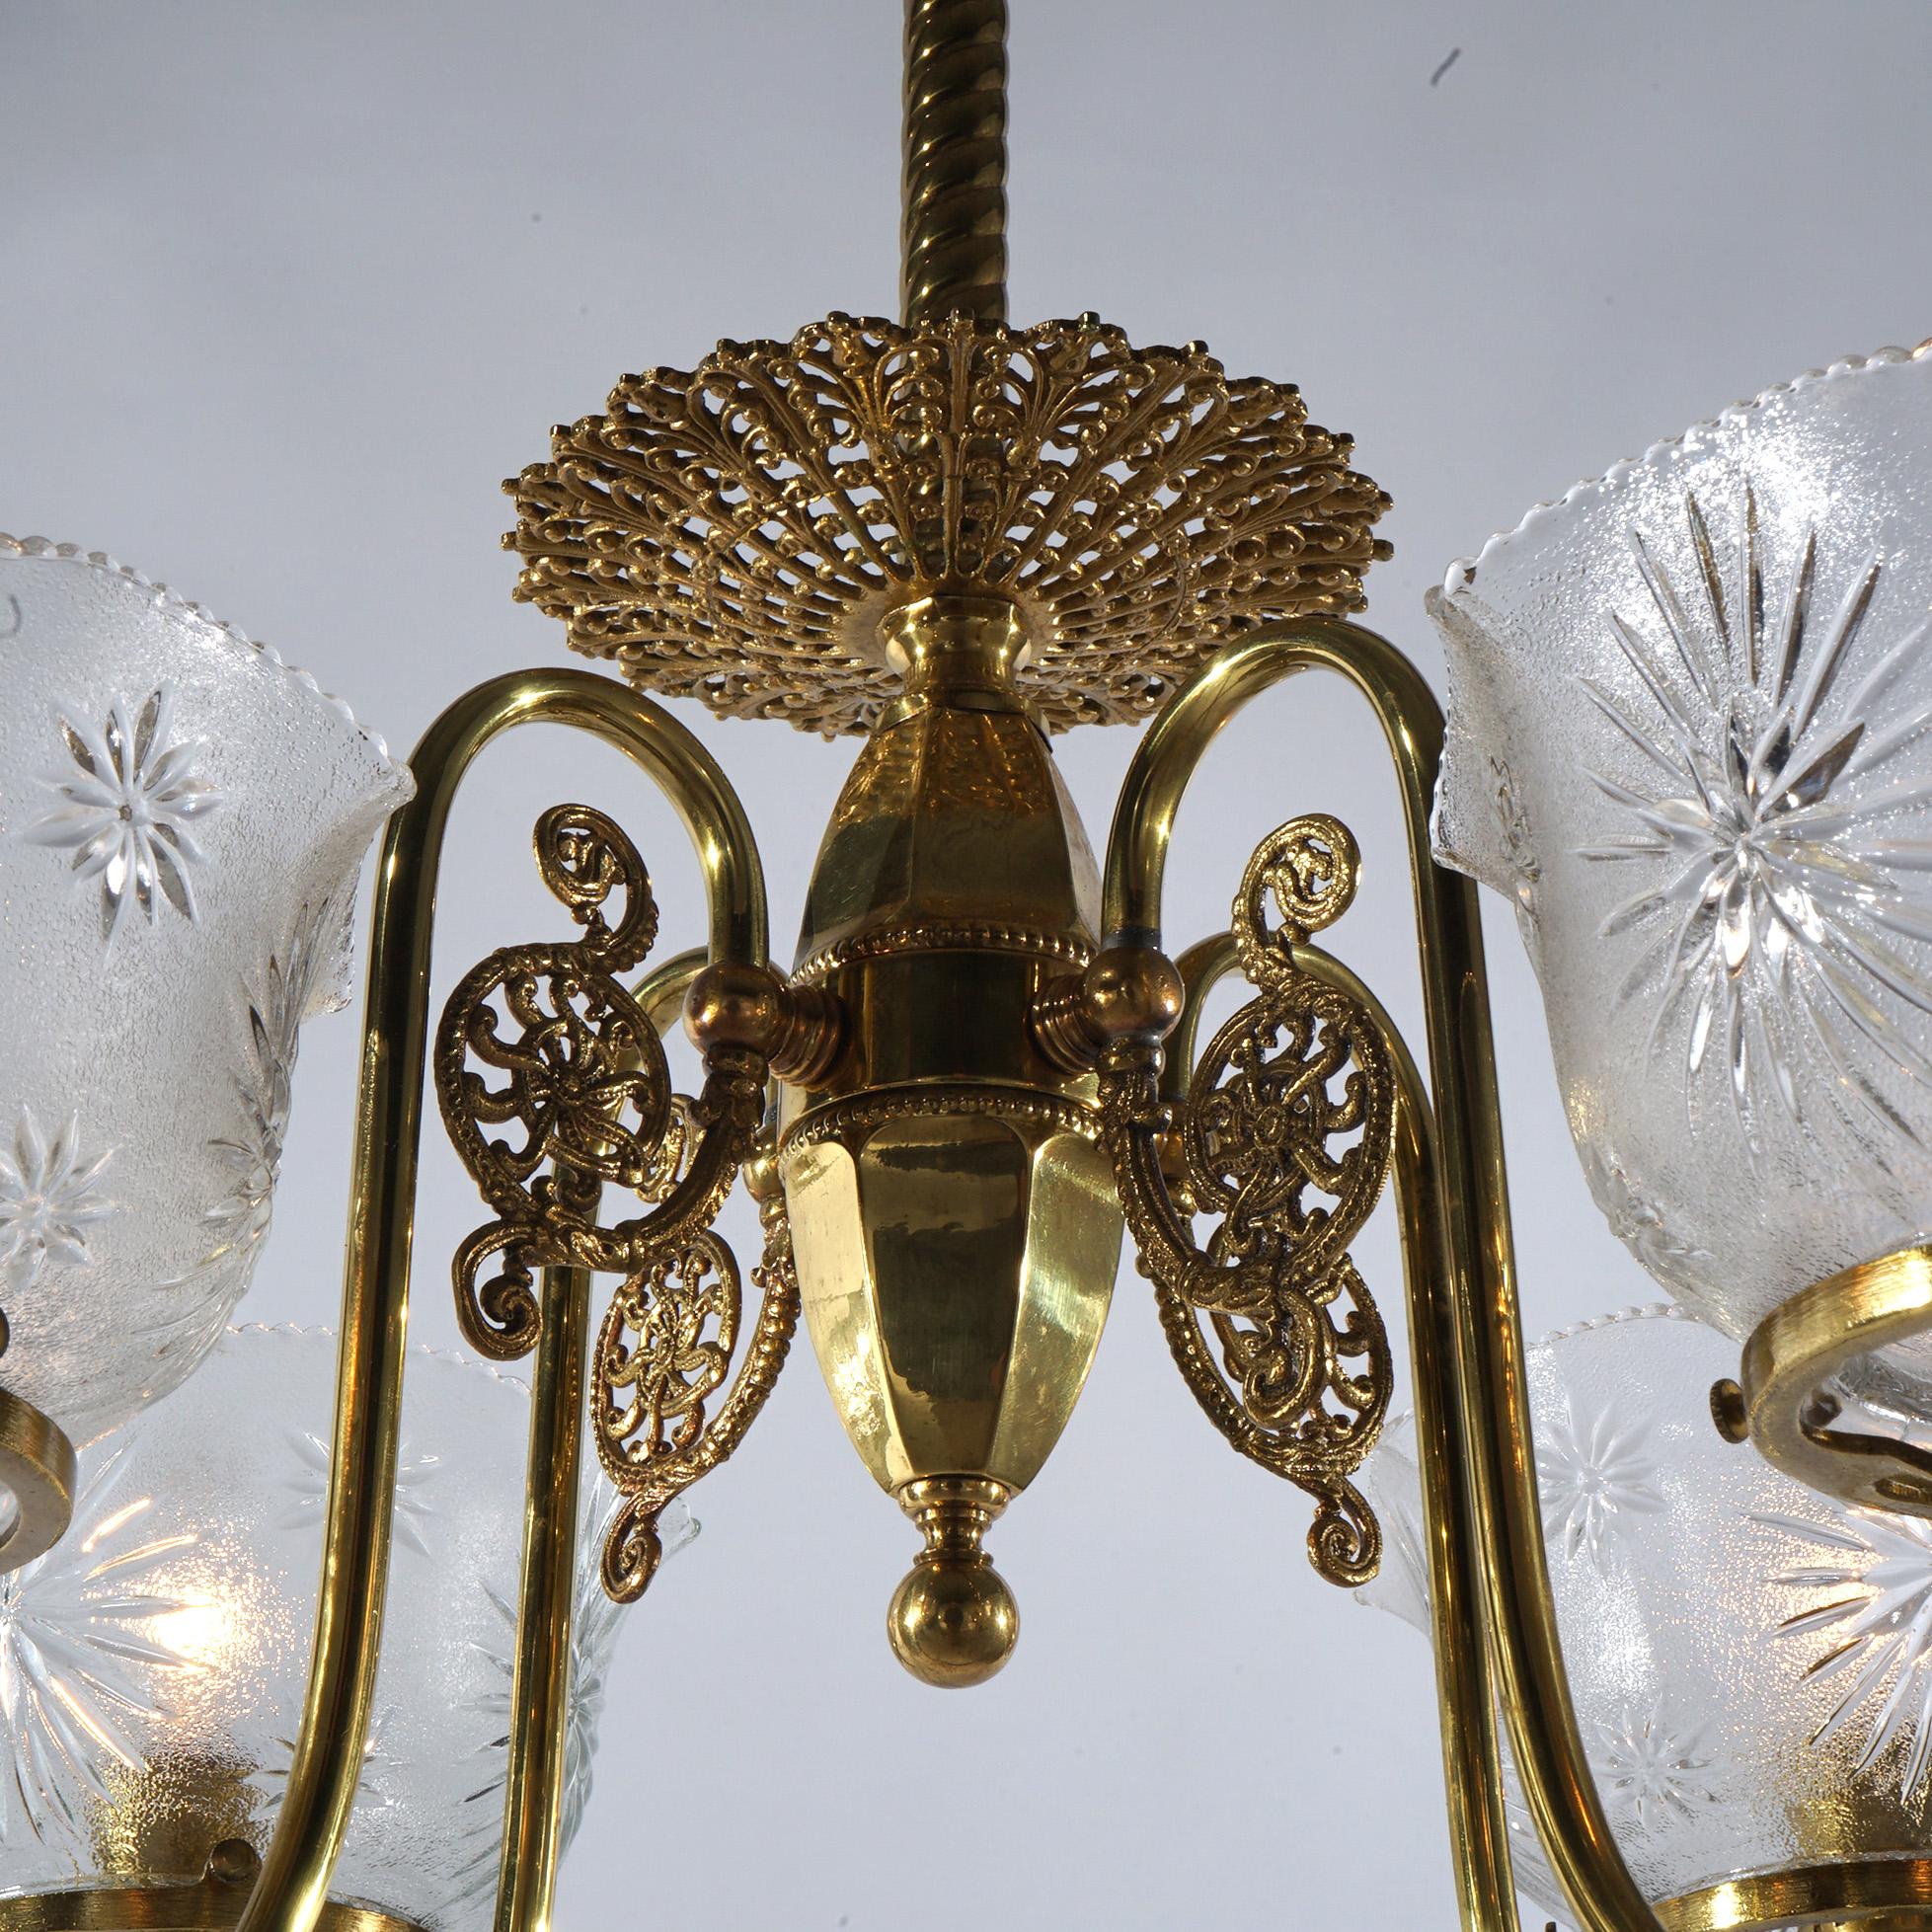 Antique Brass Four-Arm Gas Light Hanging Fixture with Glass Shades C1880 For Sale 8